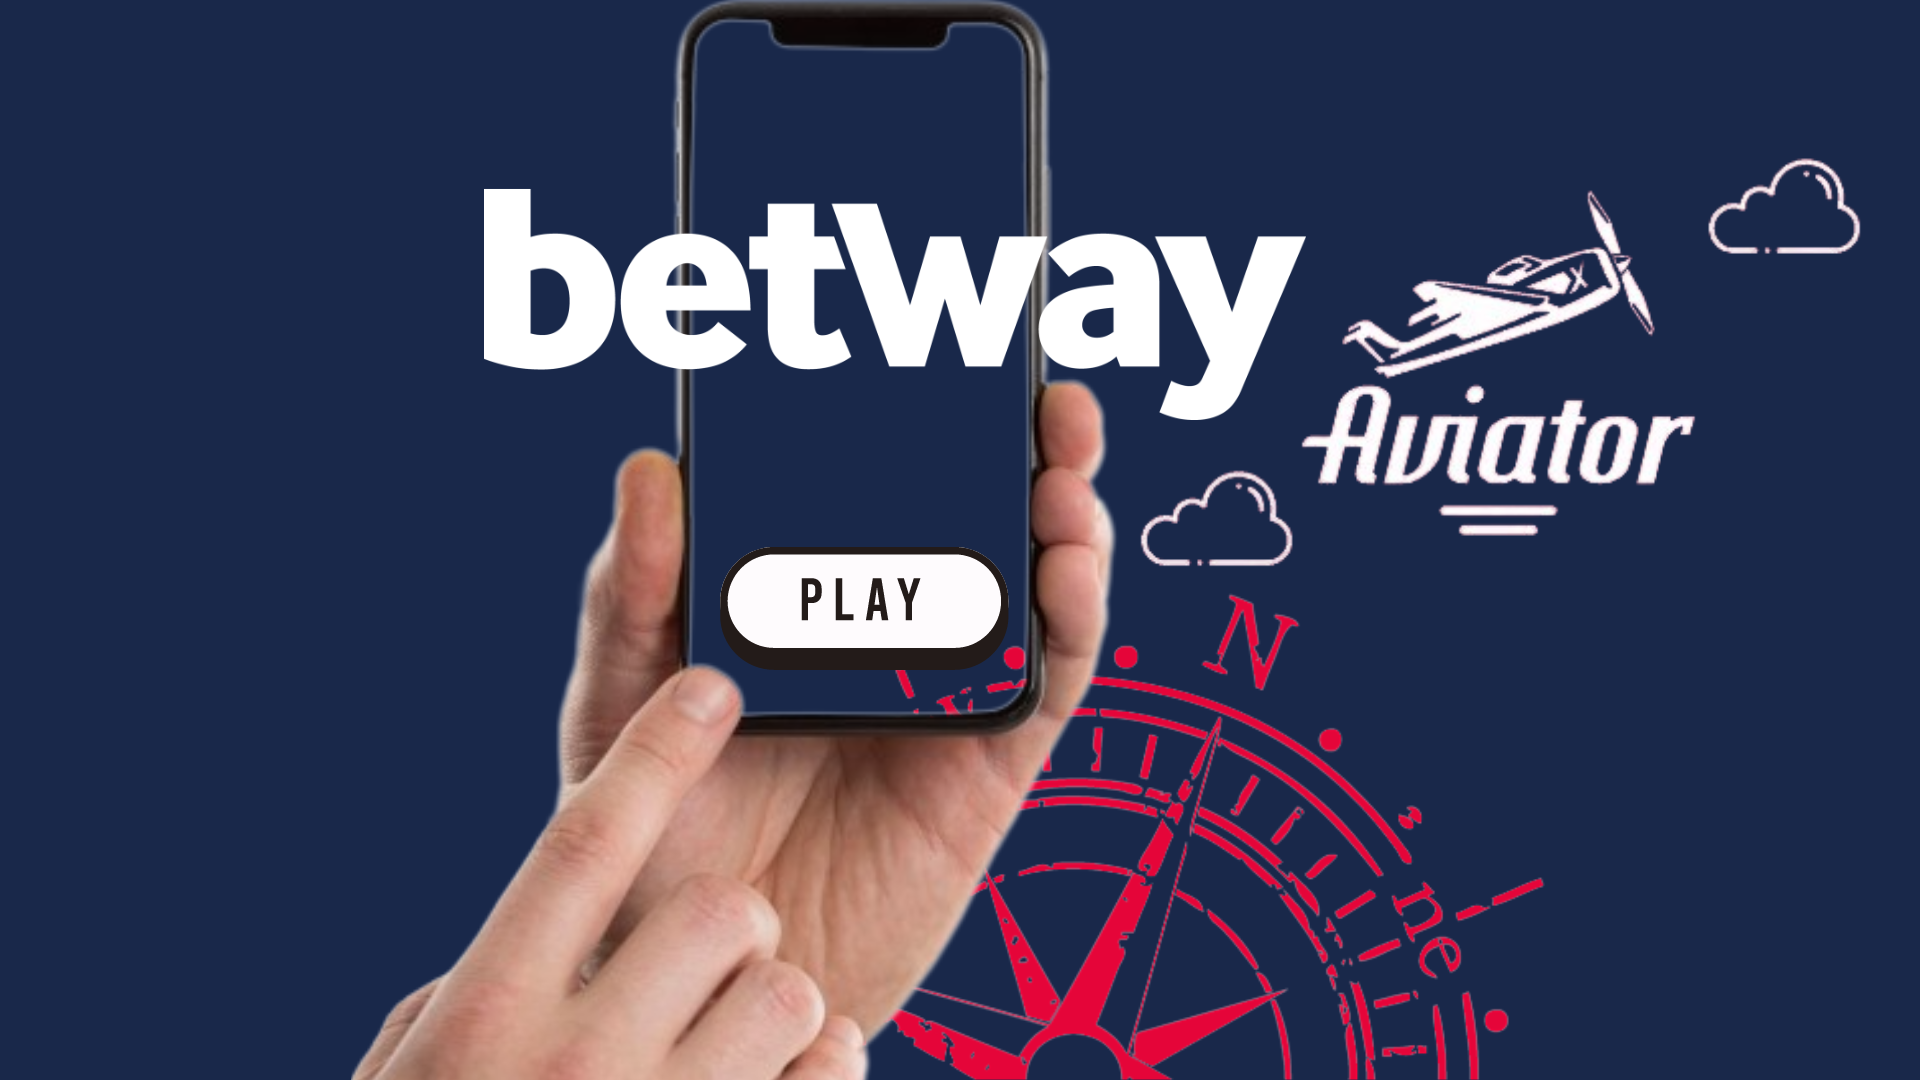 a hand holding the phone with text betway on it and aviator betway app game logo